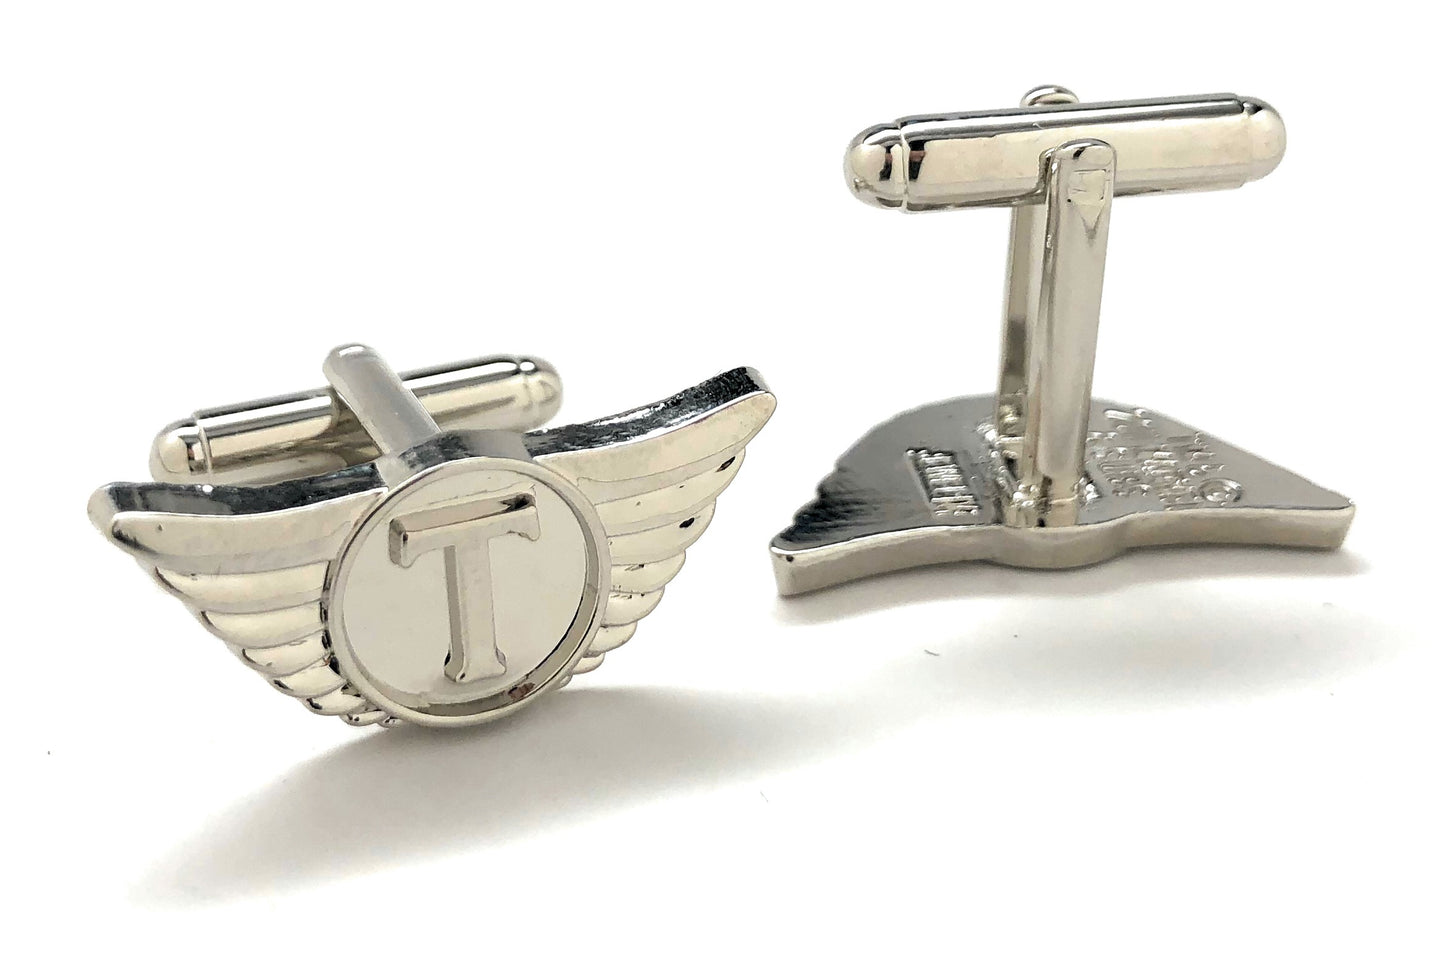 Thor Cufflinks Thor Wings The Mighty Thor Cuff Links Marvel Movie Packaging